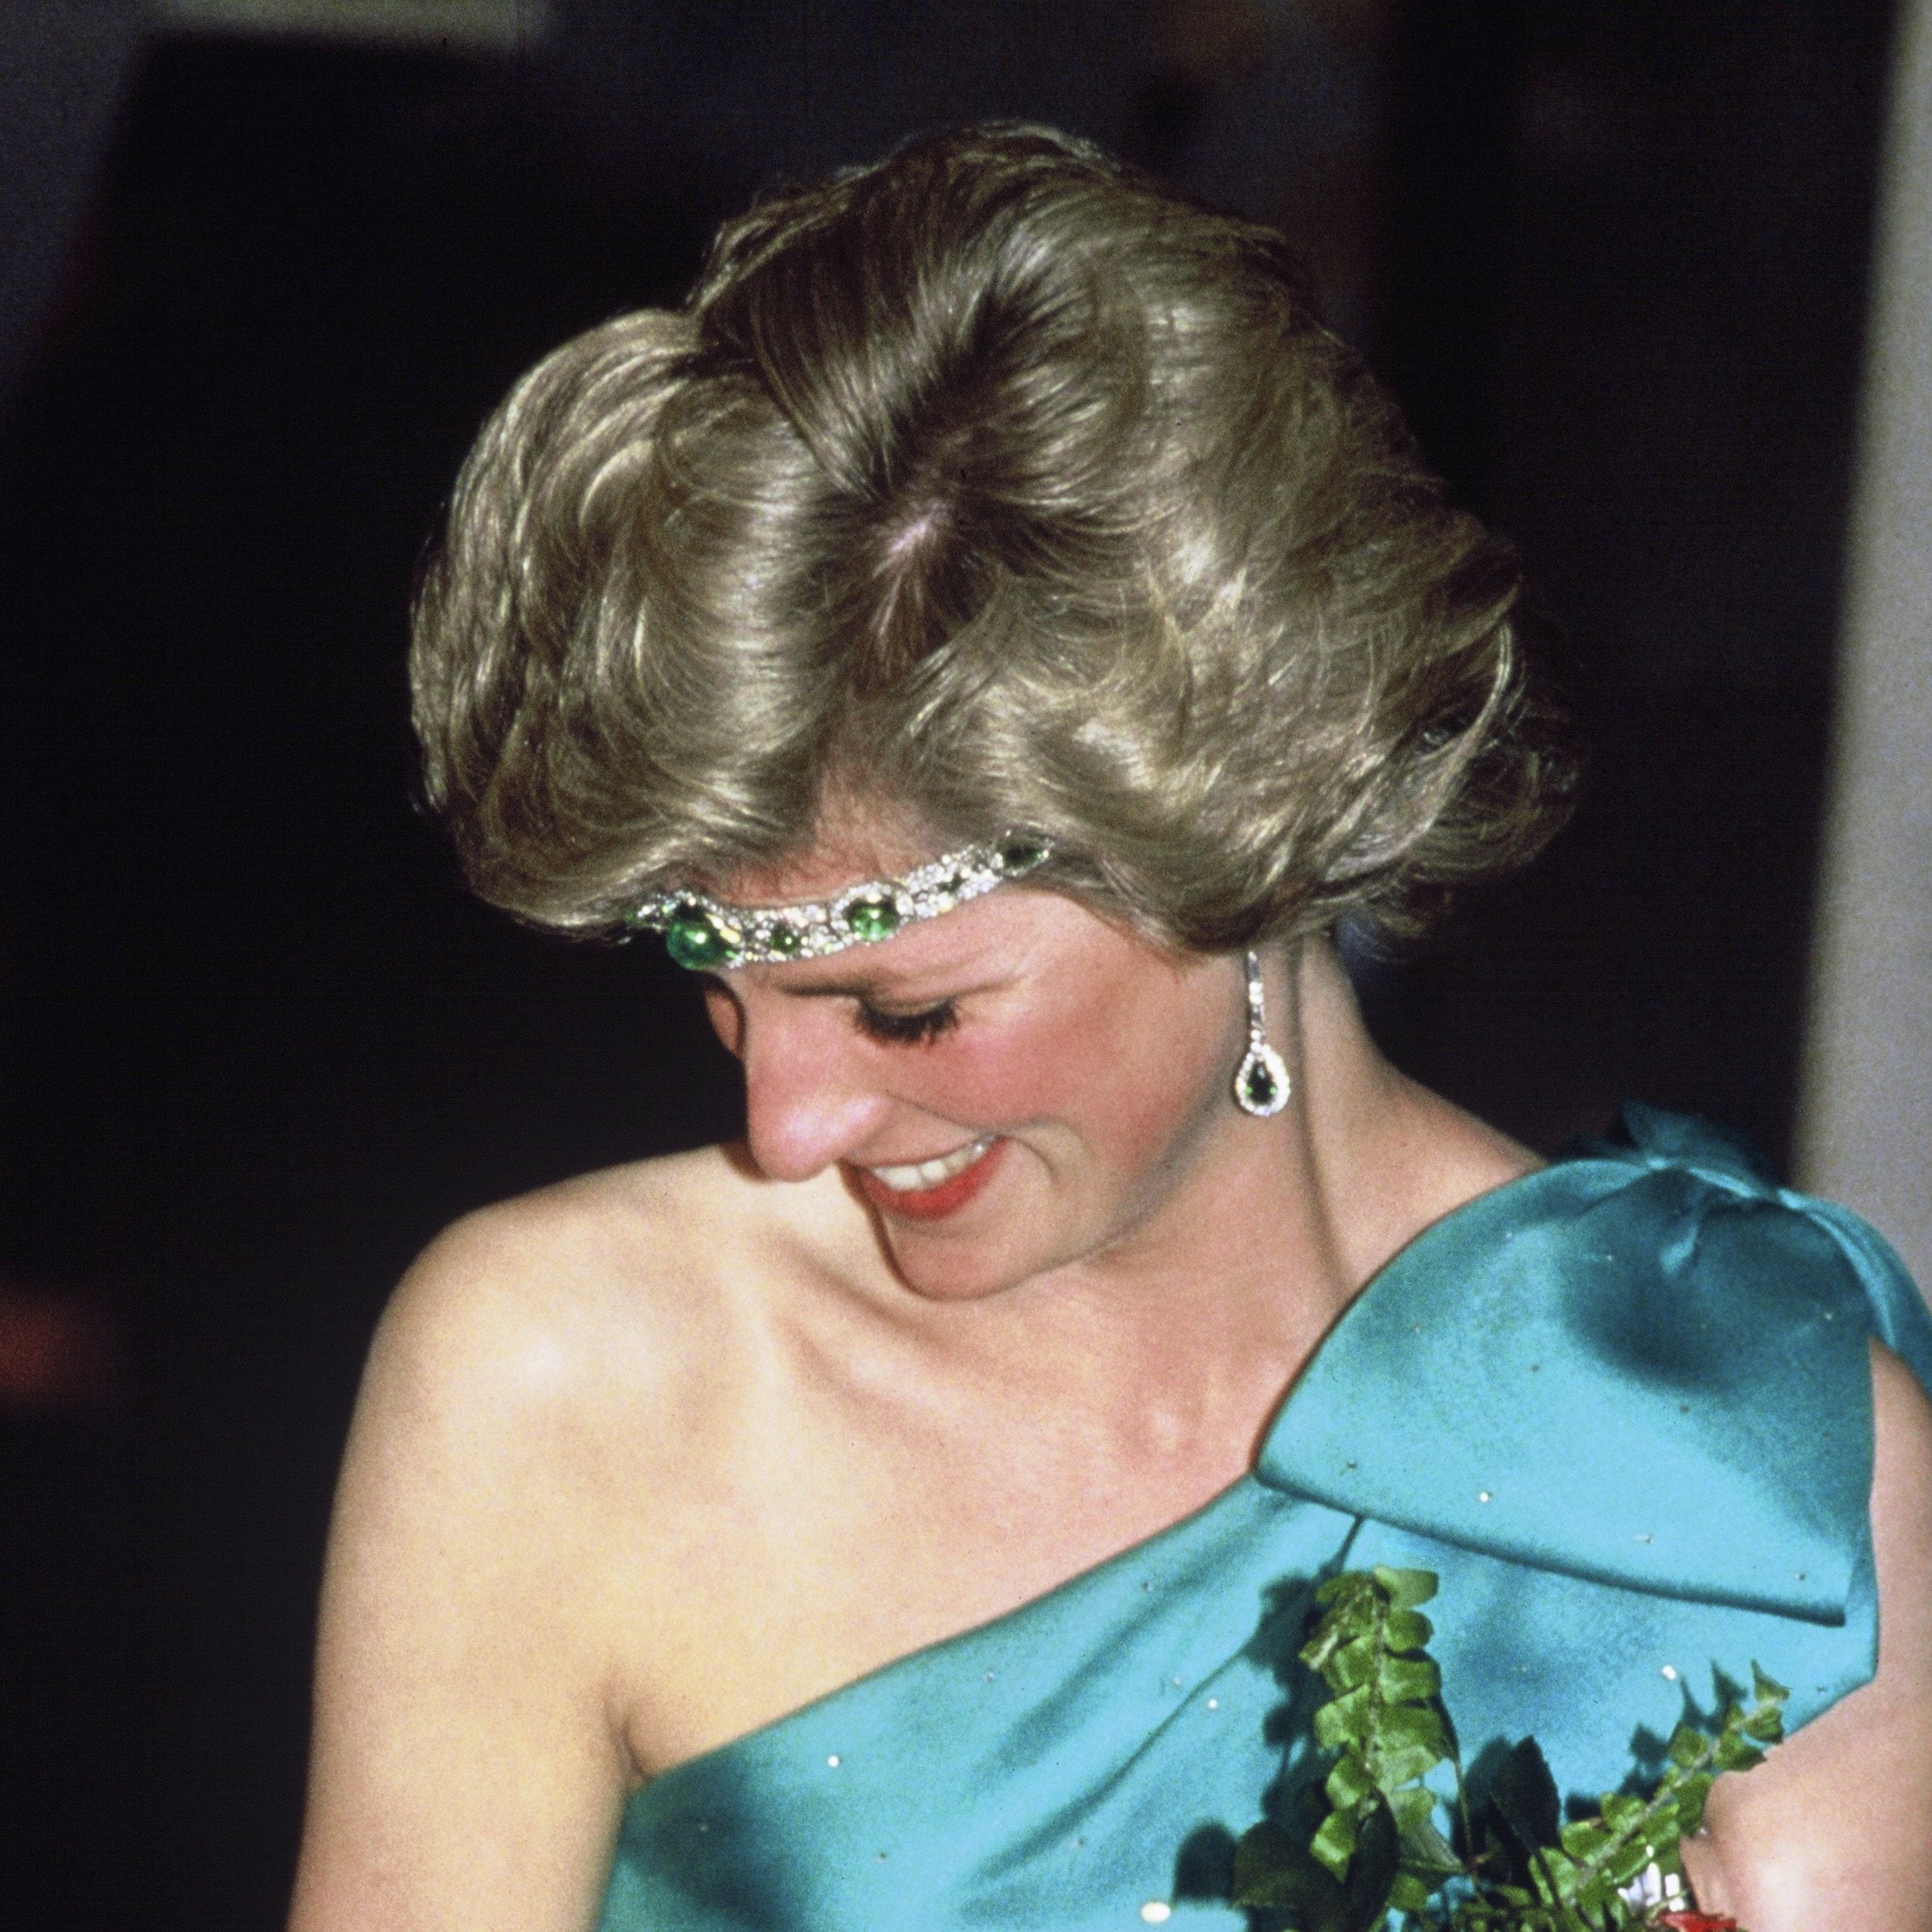 Princess Diana's Sapphire and Pearl Choker Necklace